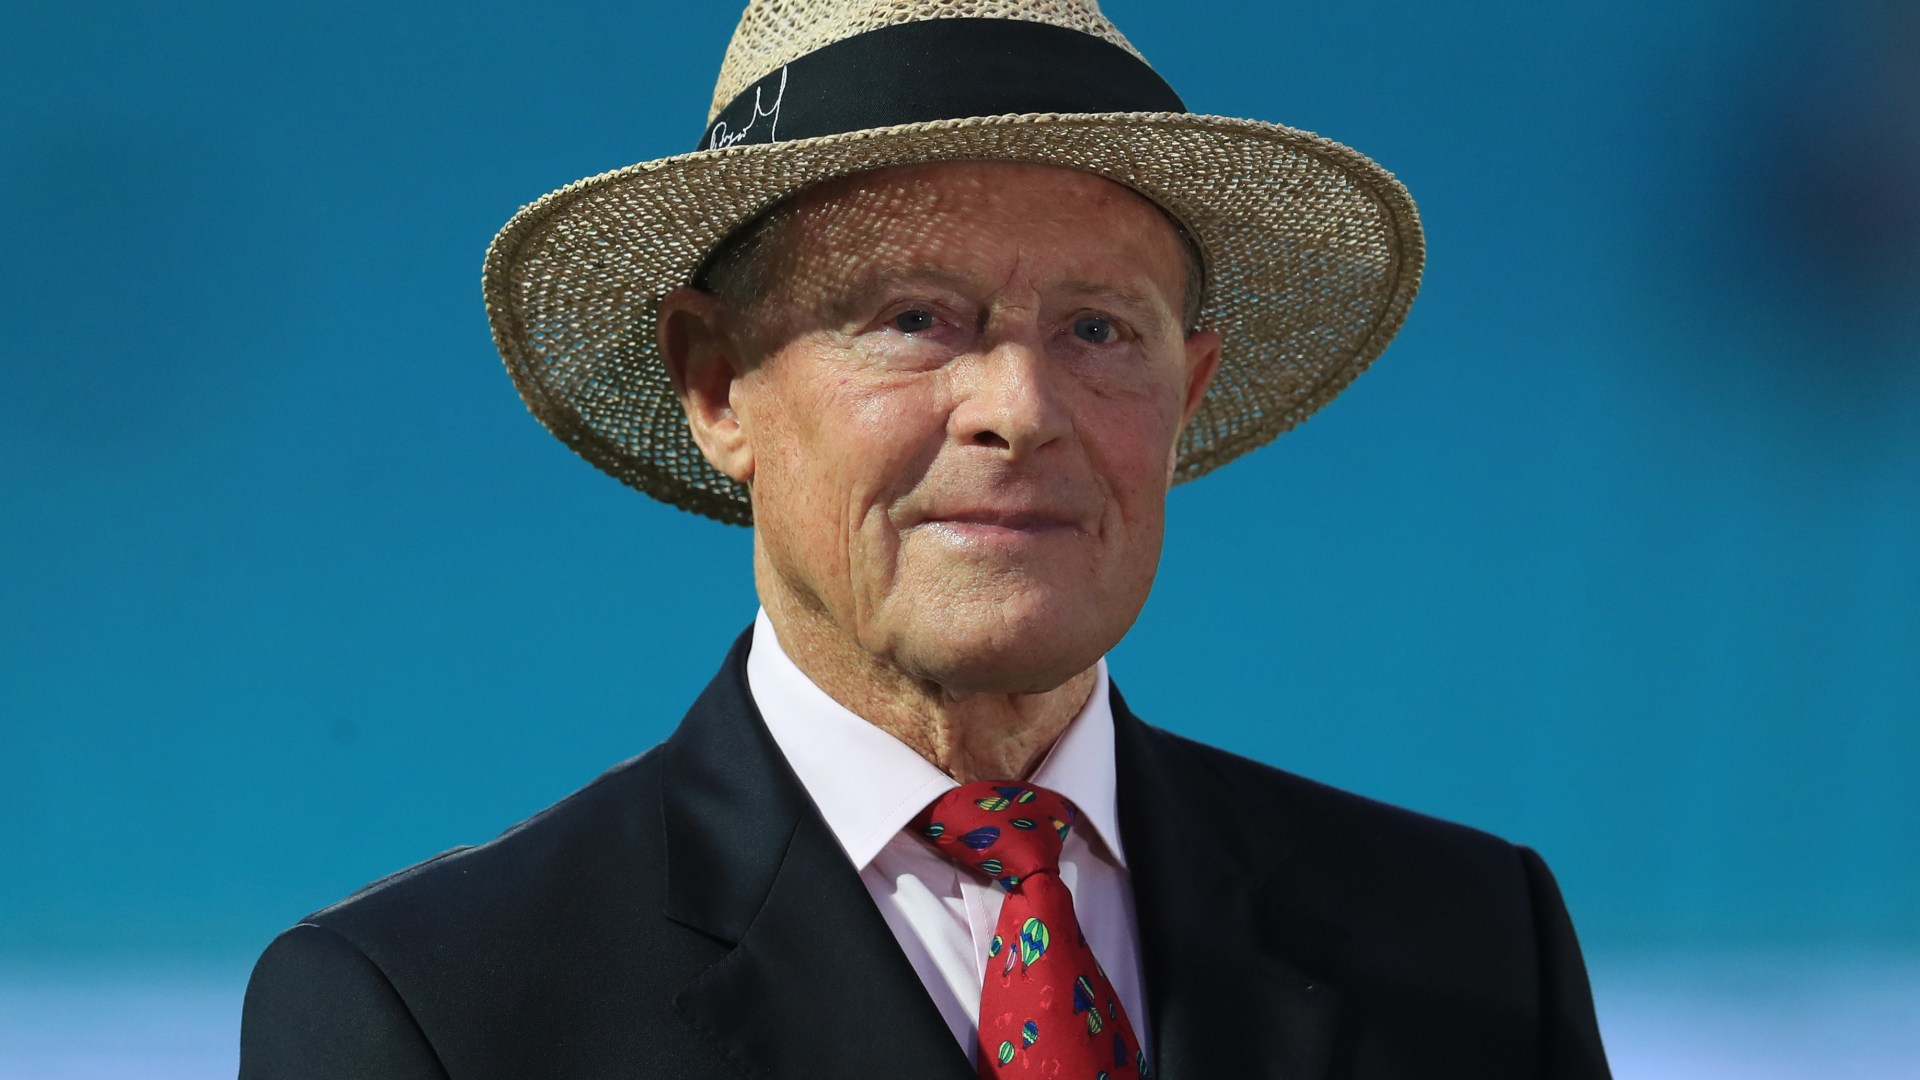 England legend Sir Geoffrey Boycott rushed to hospital and ‘can’t eat or drink’ after setback in cancer surgery recovery [Video]